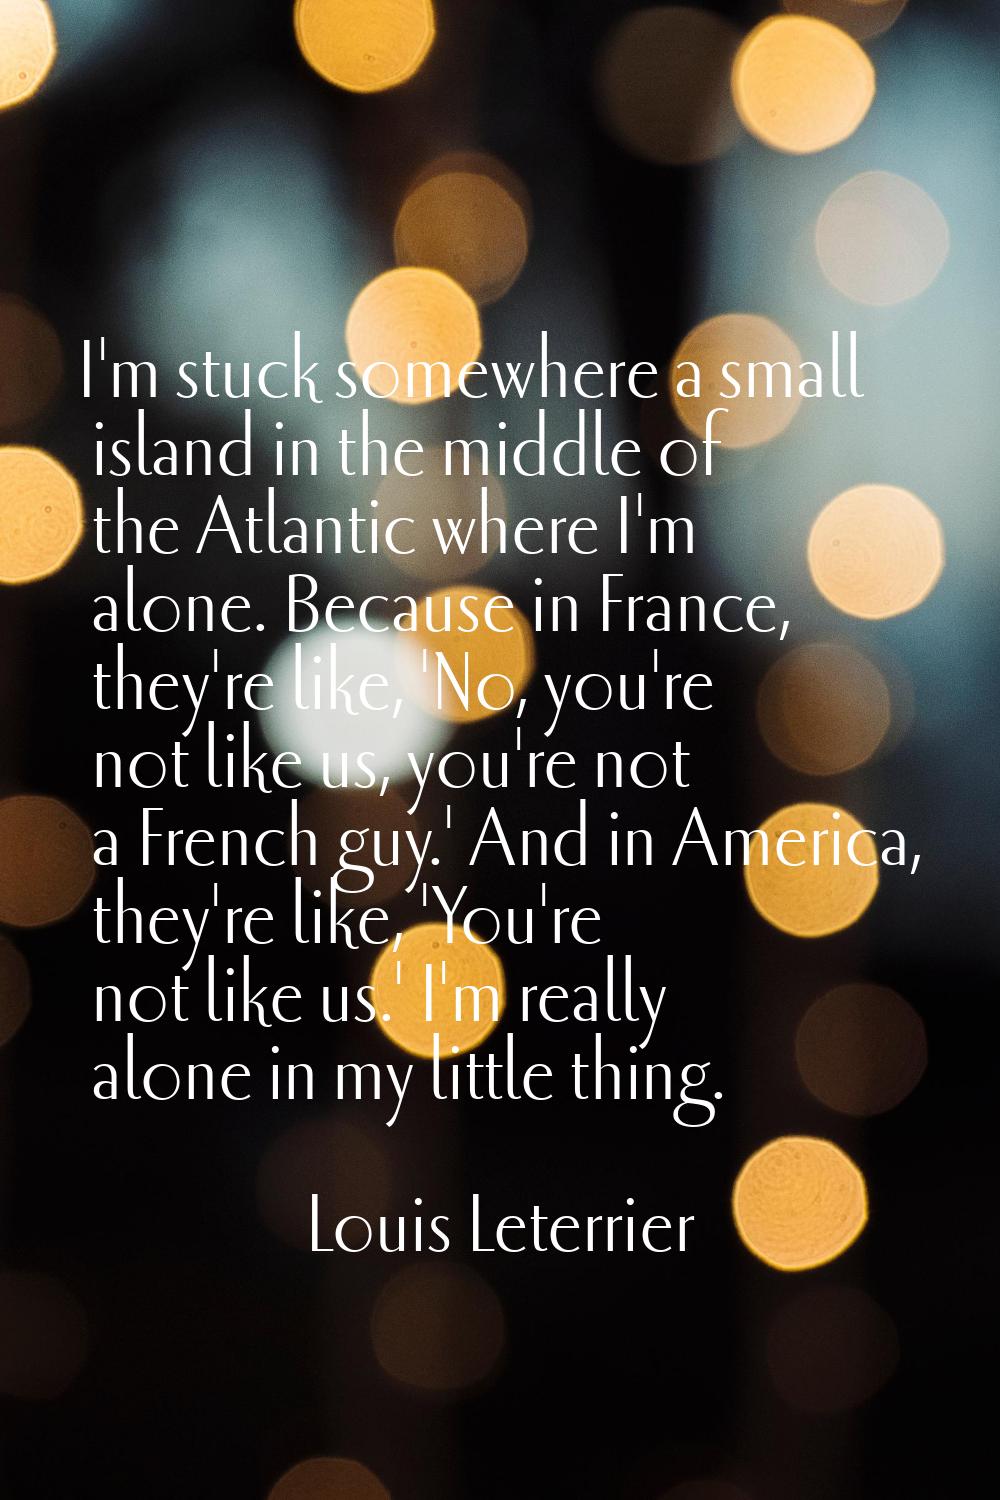 I'm stuck somewhere a small island in the middle of the Atlantic where I'm alone. Because in France